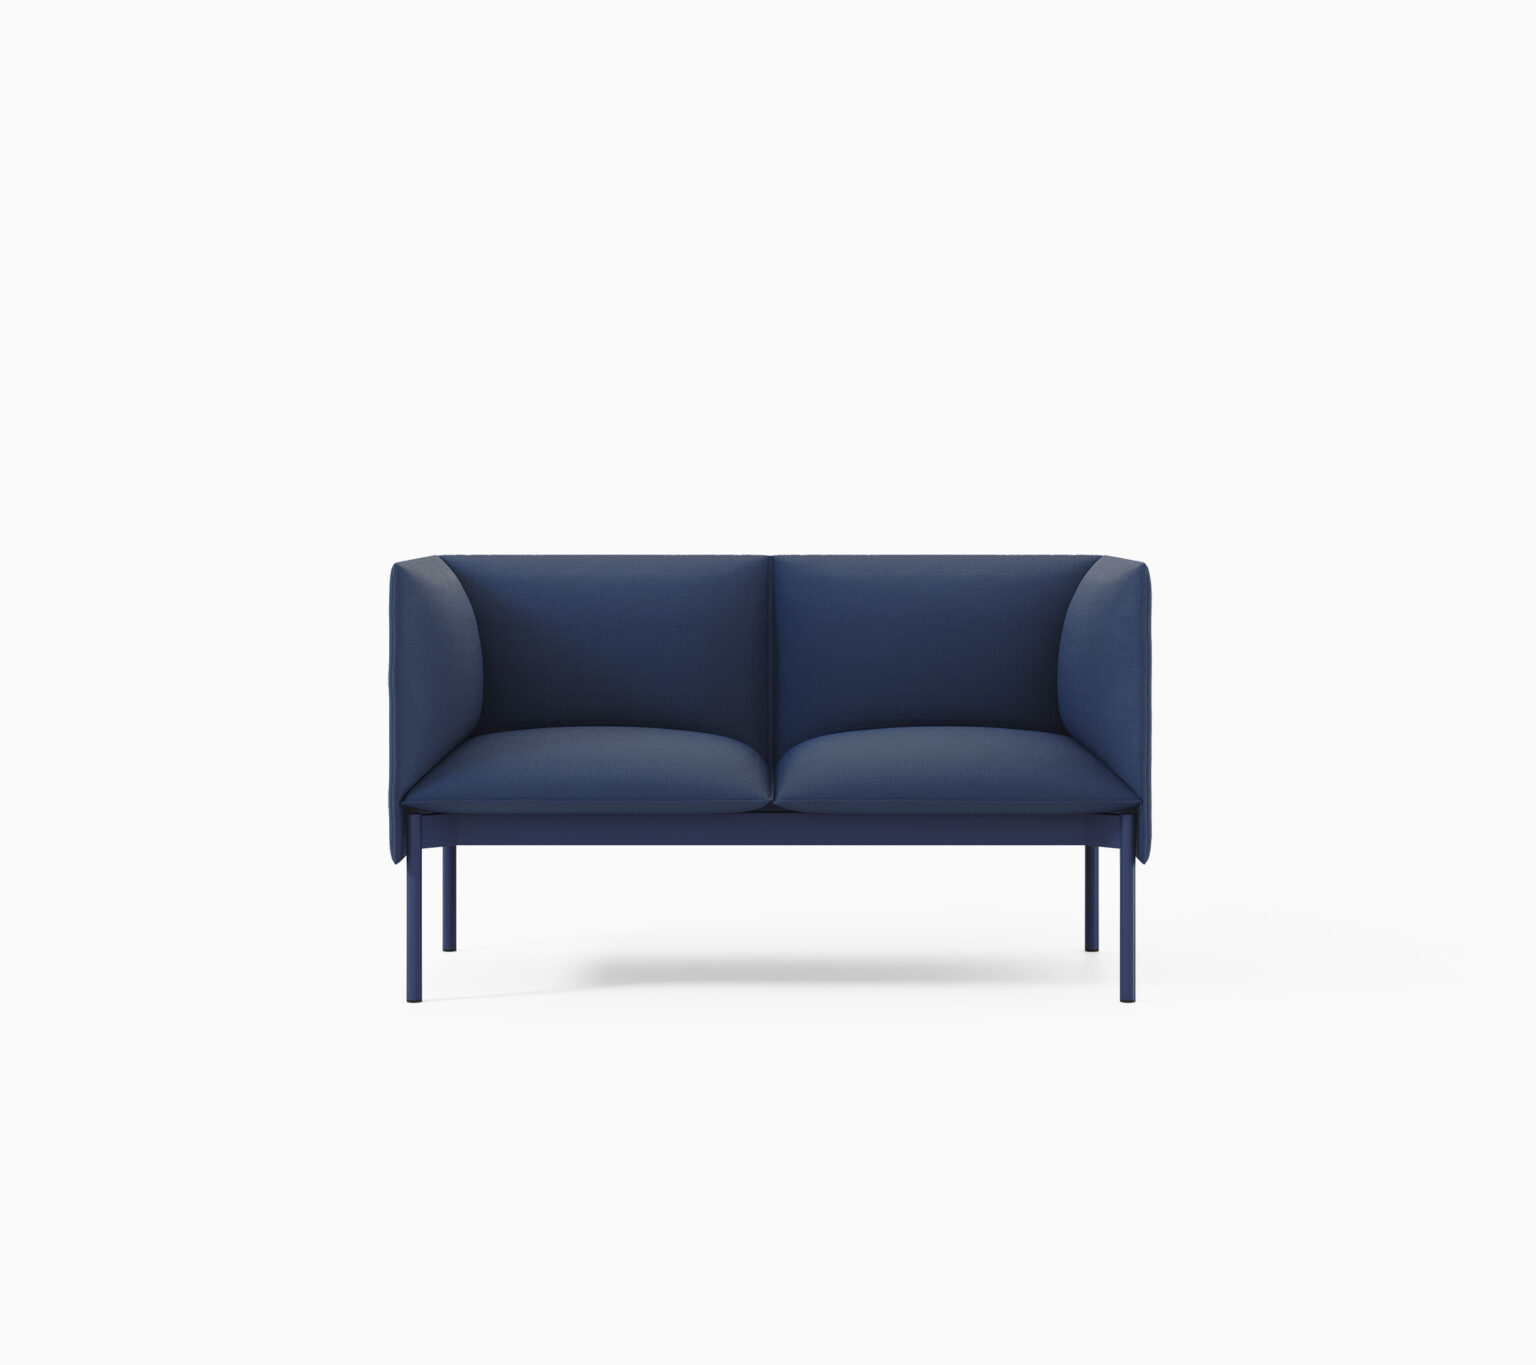 2 seater with armrests